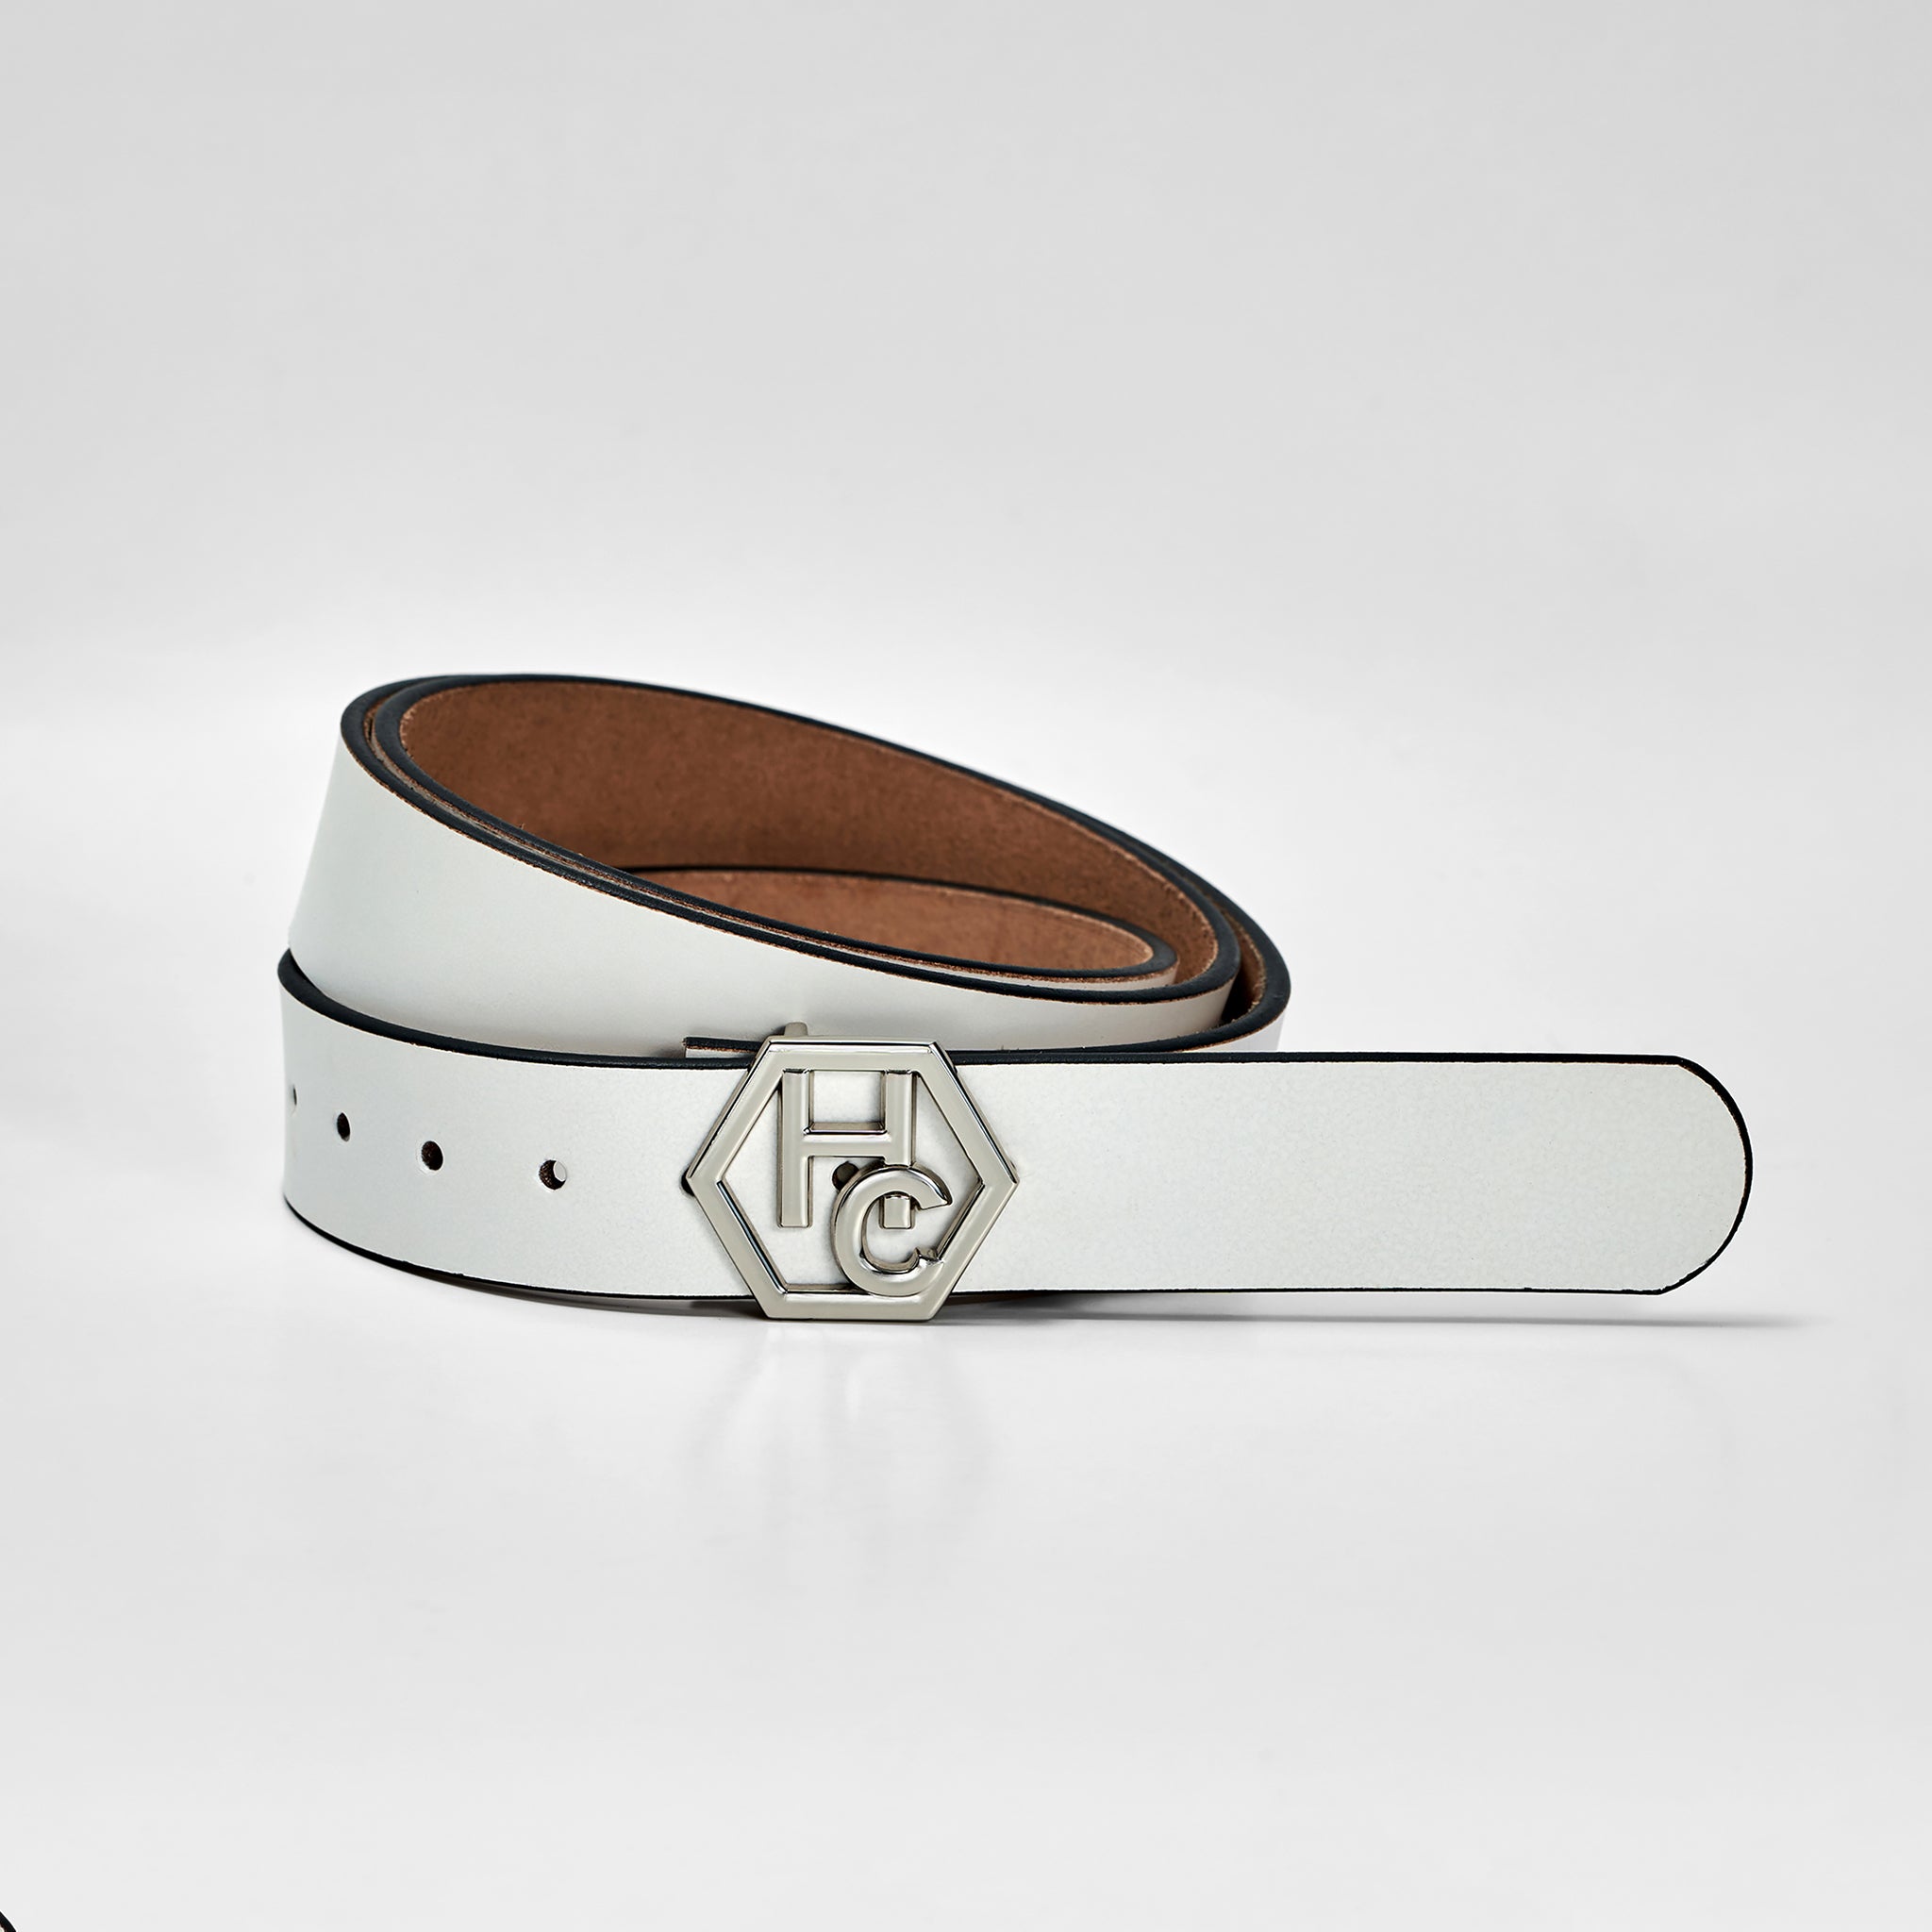 Hedonist Chicago Seamless White Leather Belt 1.3" 32381370433687